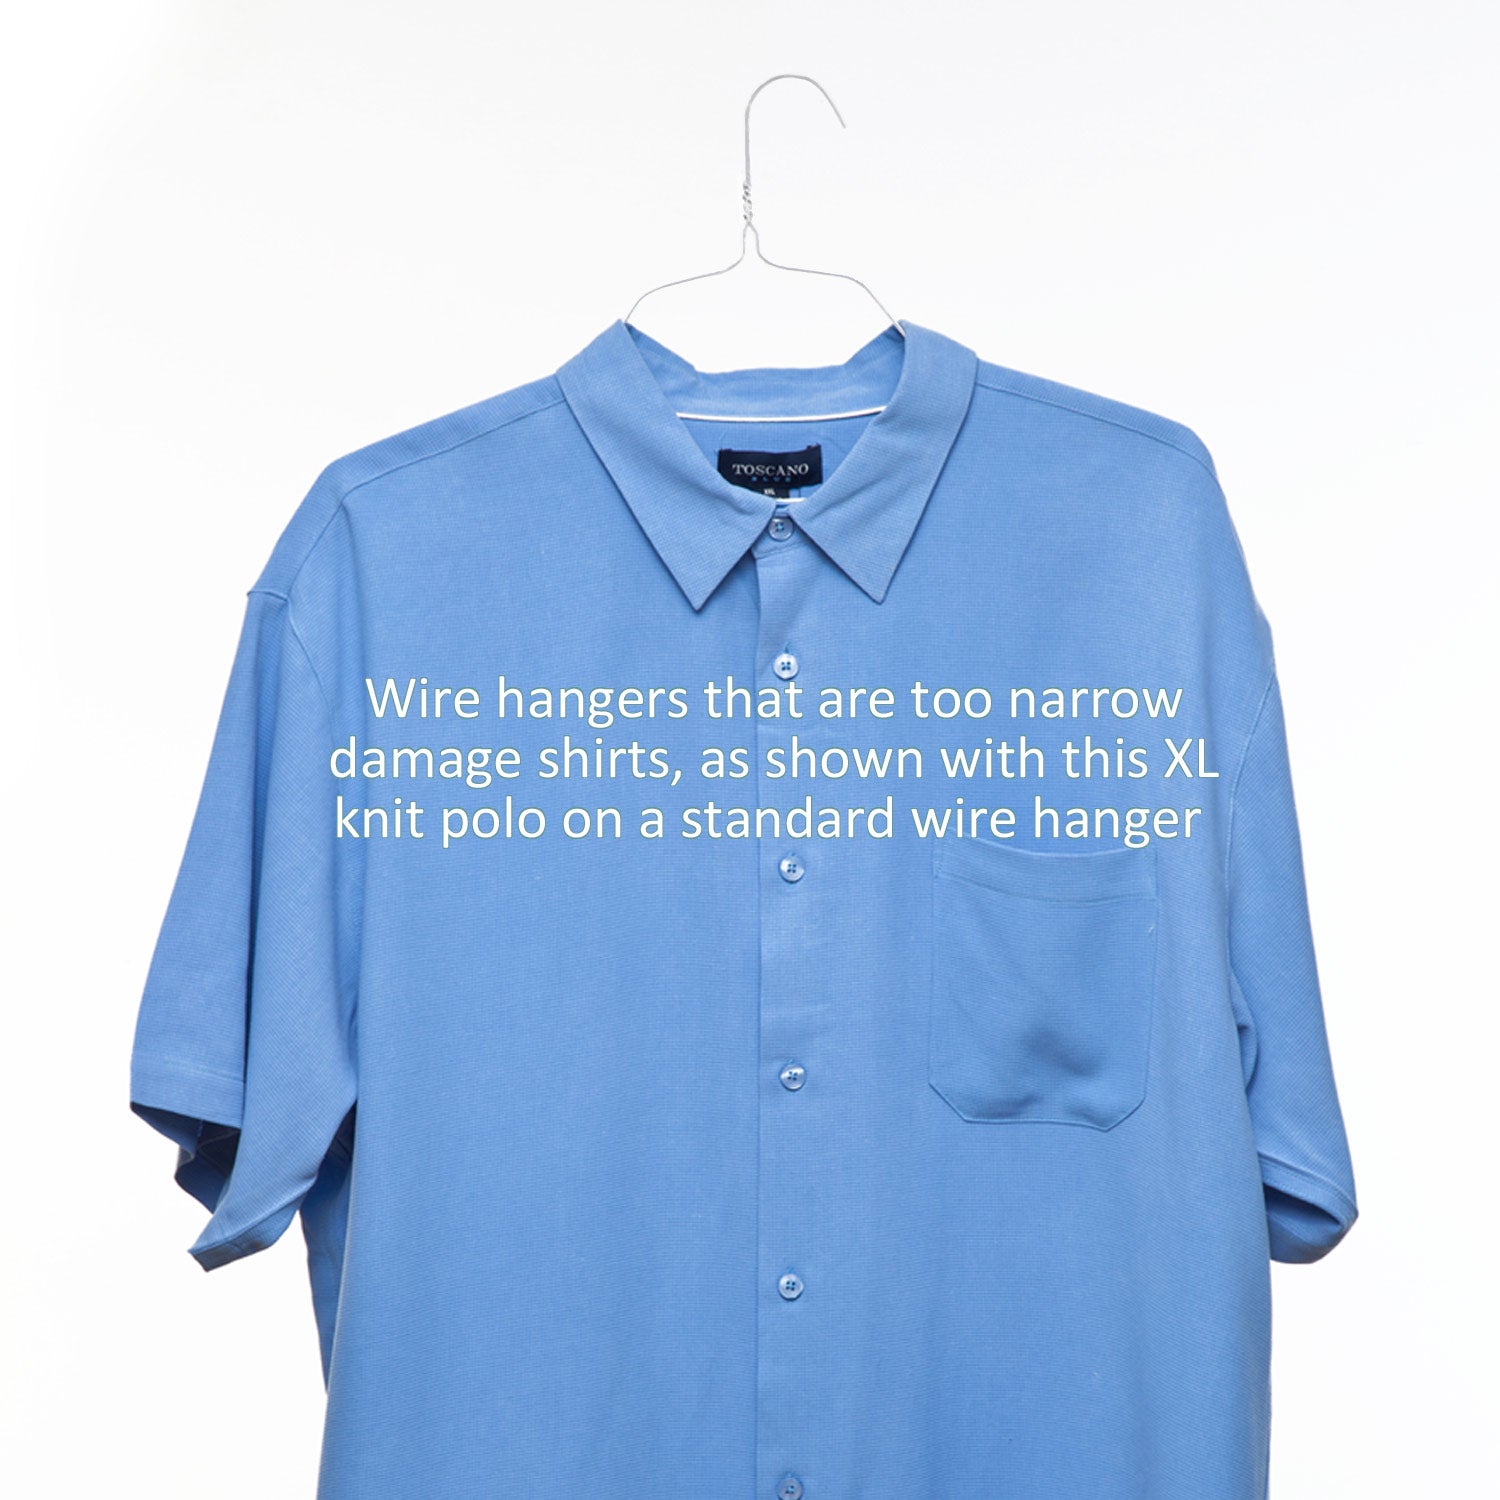 A blue shirt hanging on a Luxury Wooden Shirt Hanger (Set of 5) from KirbyAllison.com that is too narrow.